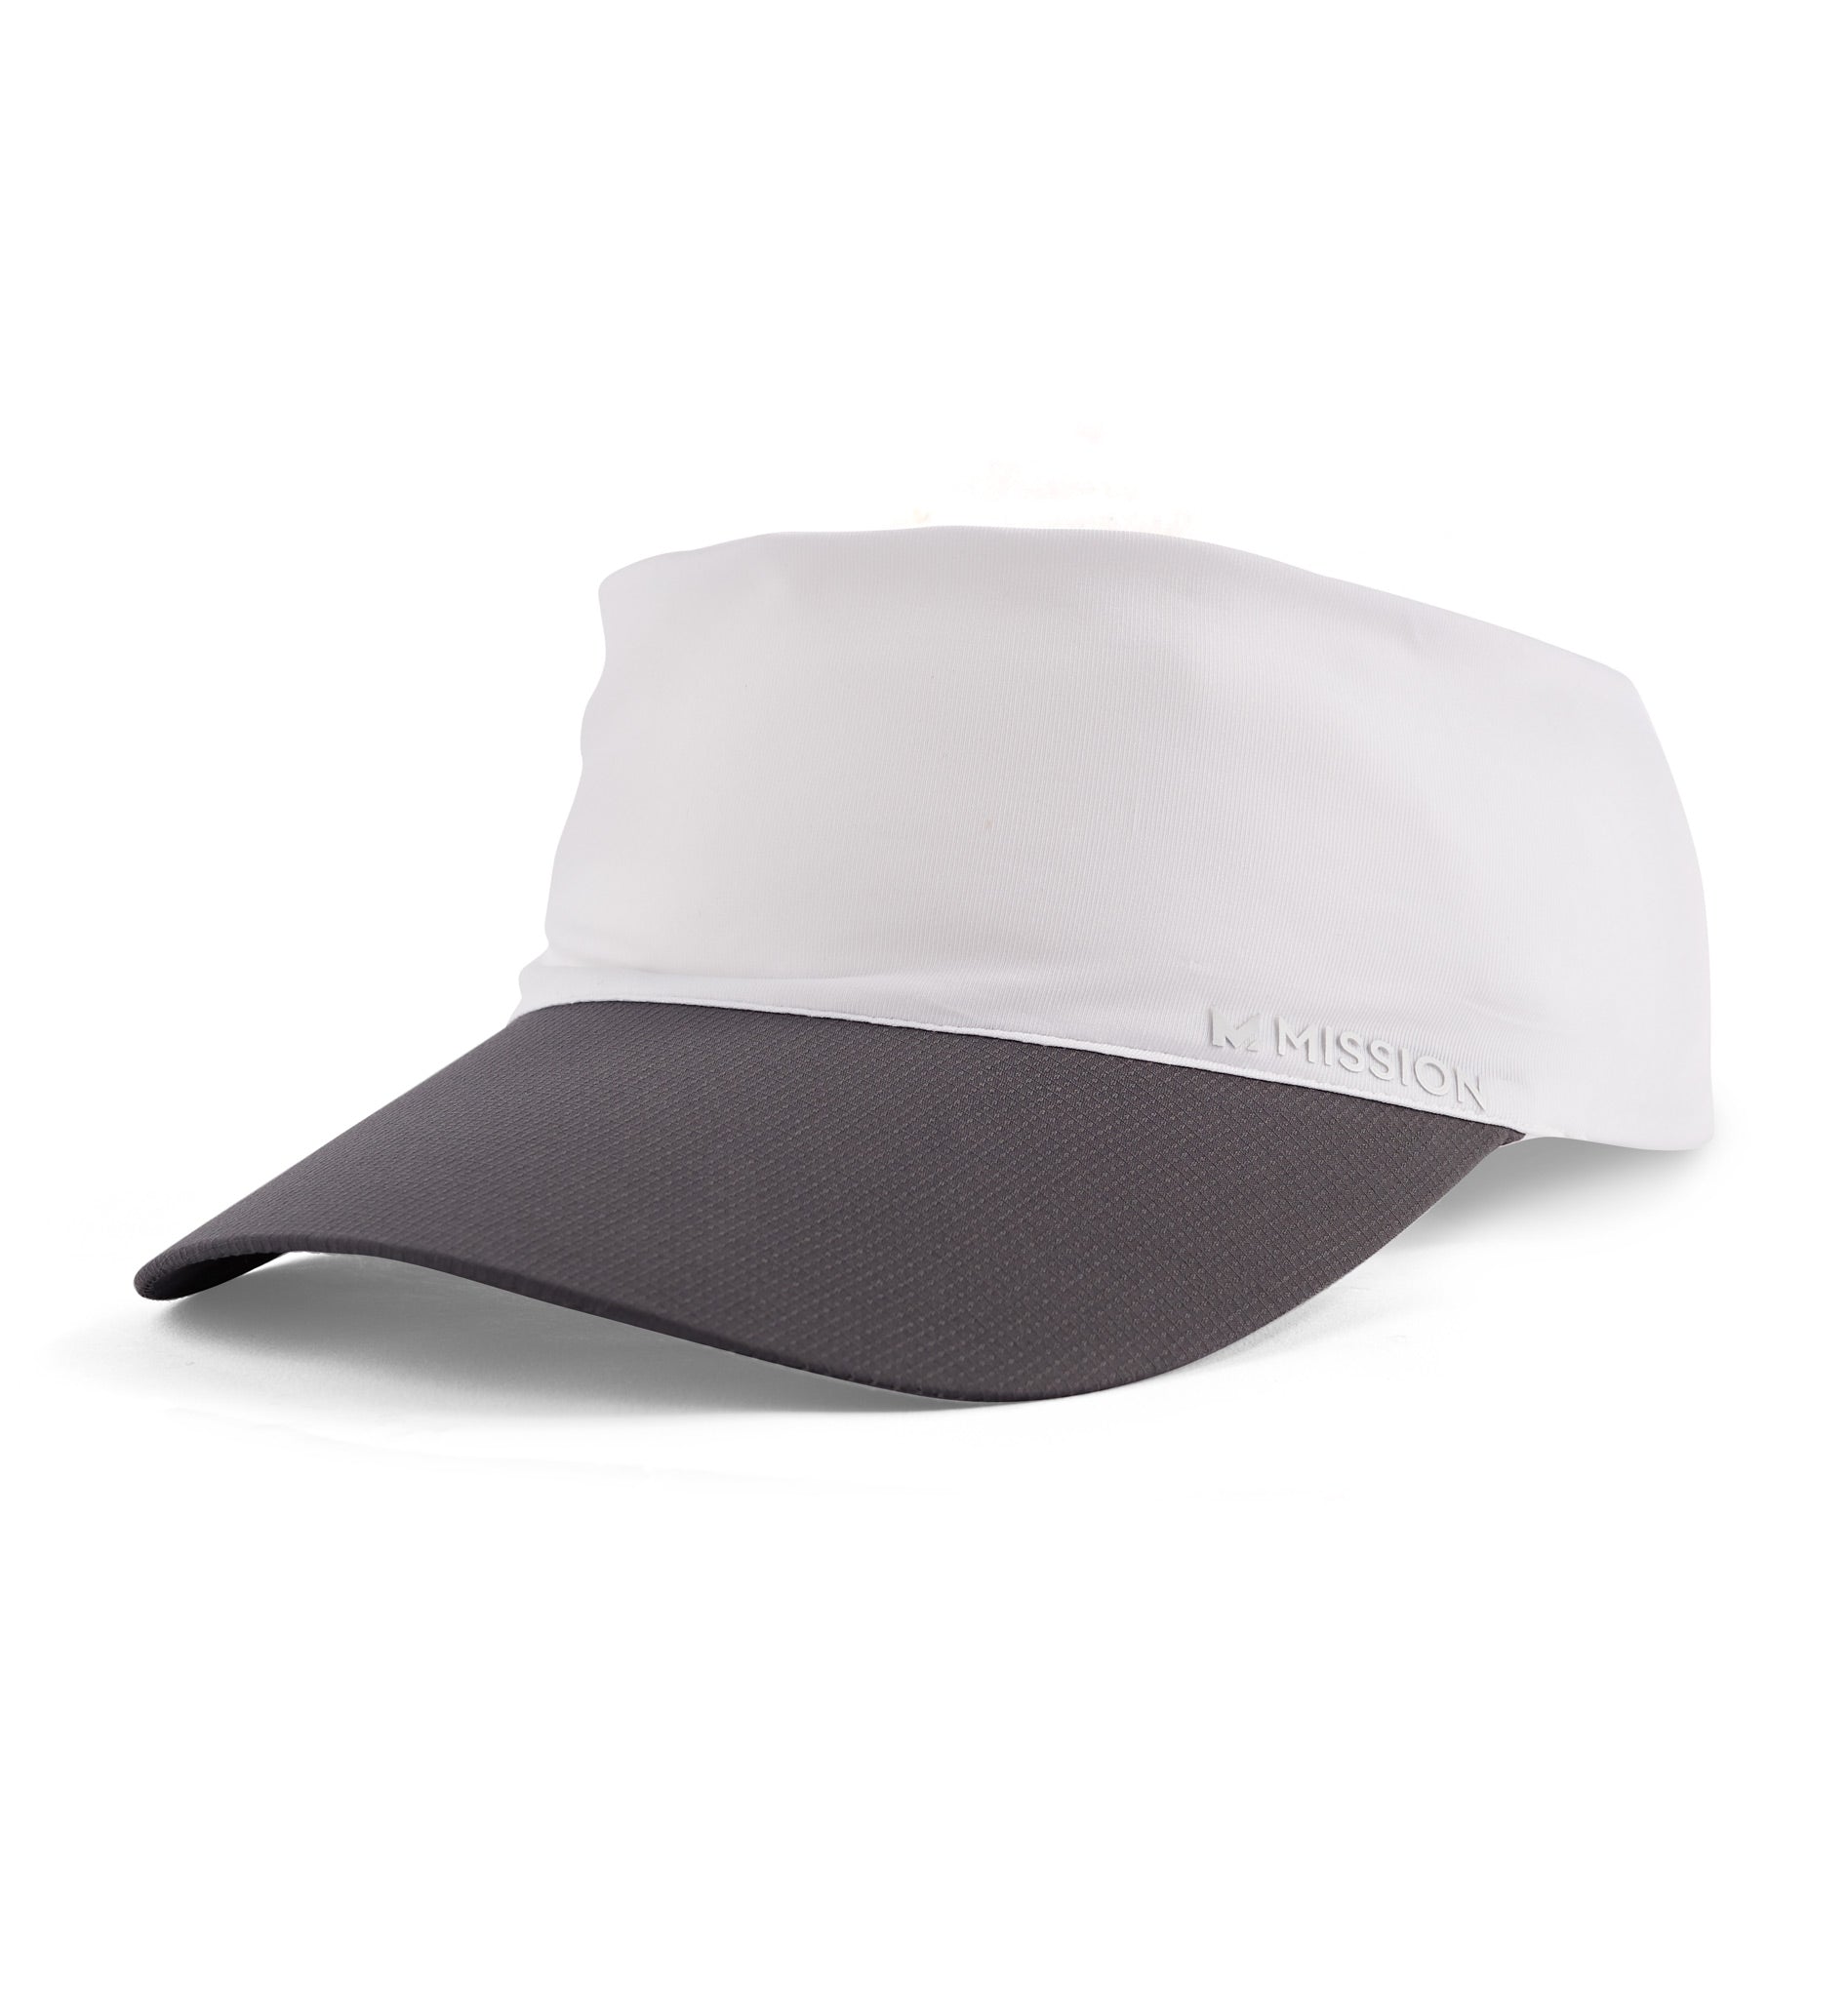 Cooling Visor Caps MISSION One Size Bright White 